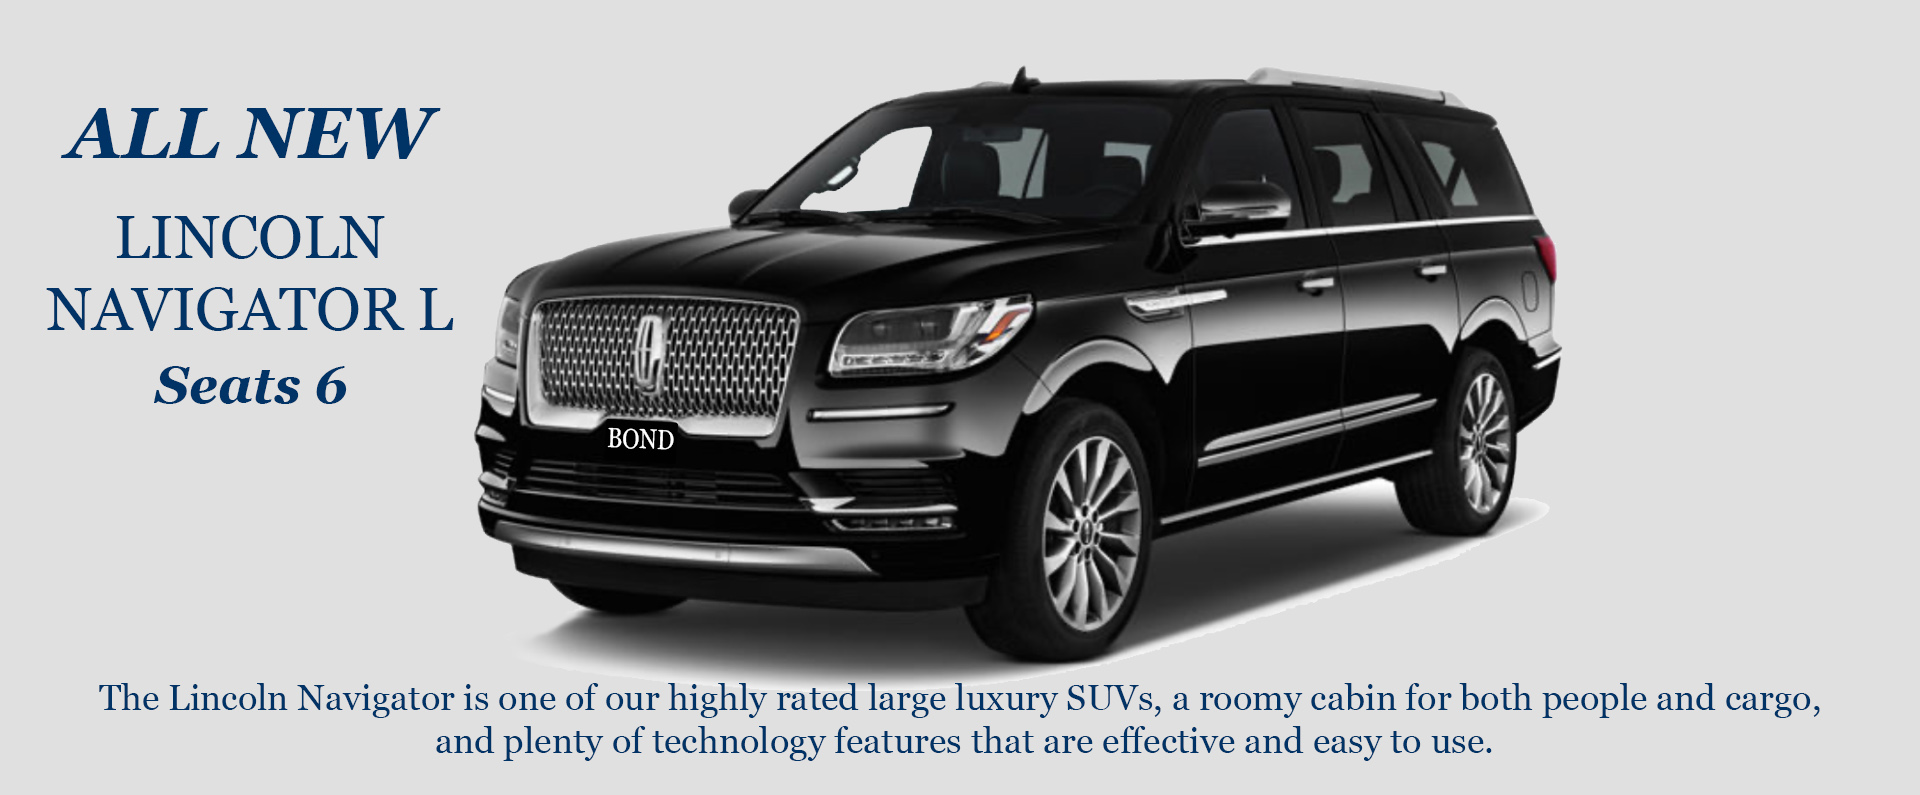 Lincoln Navigator L and SUV at Newtown Limo Service